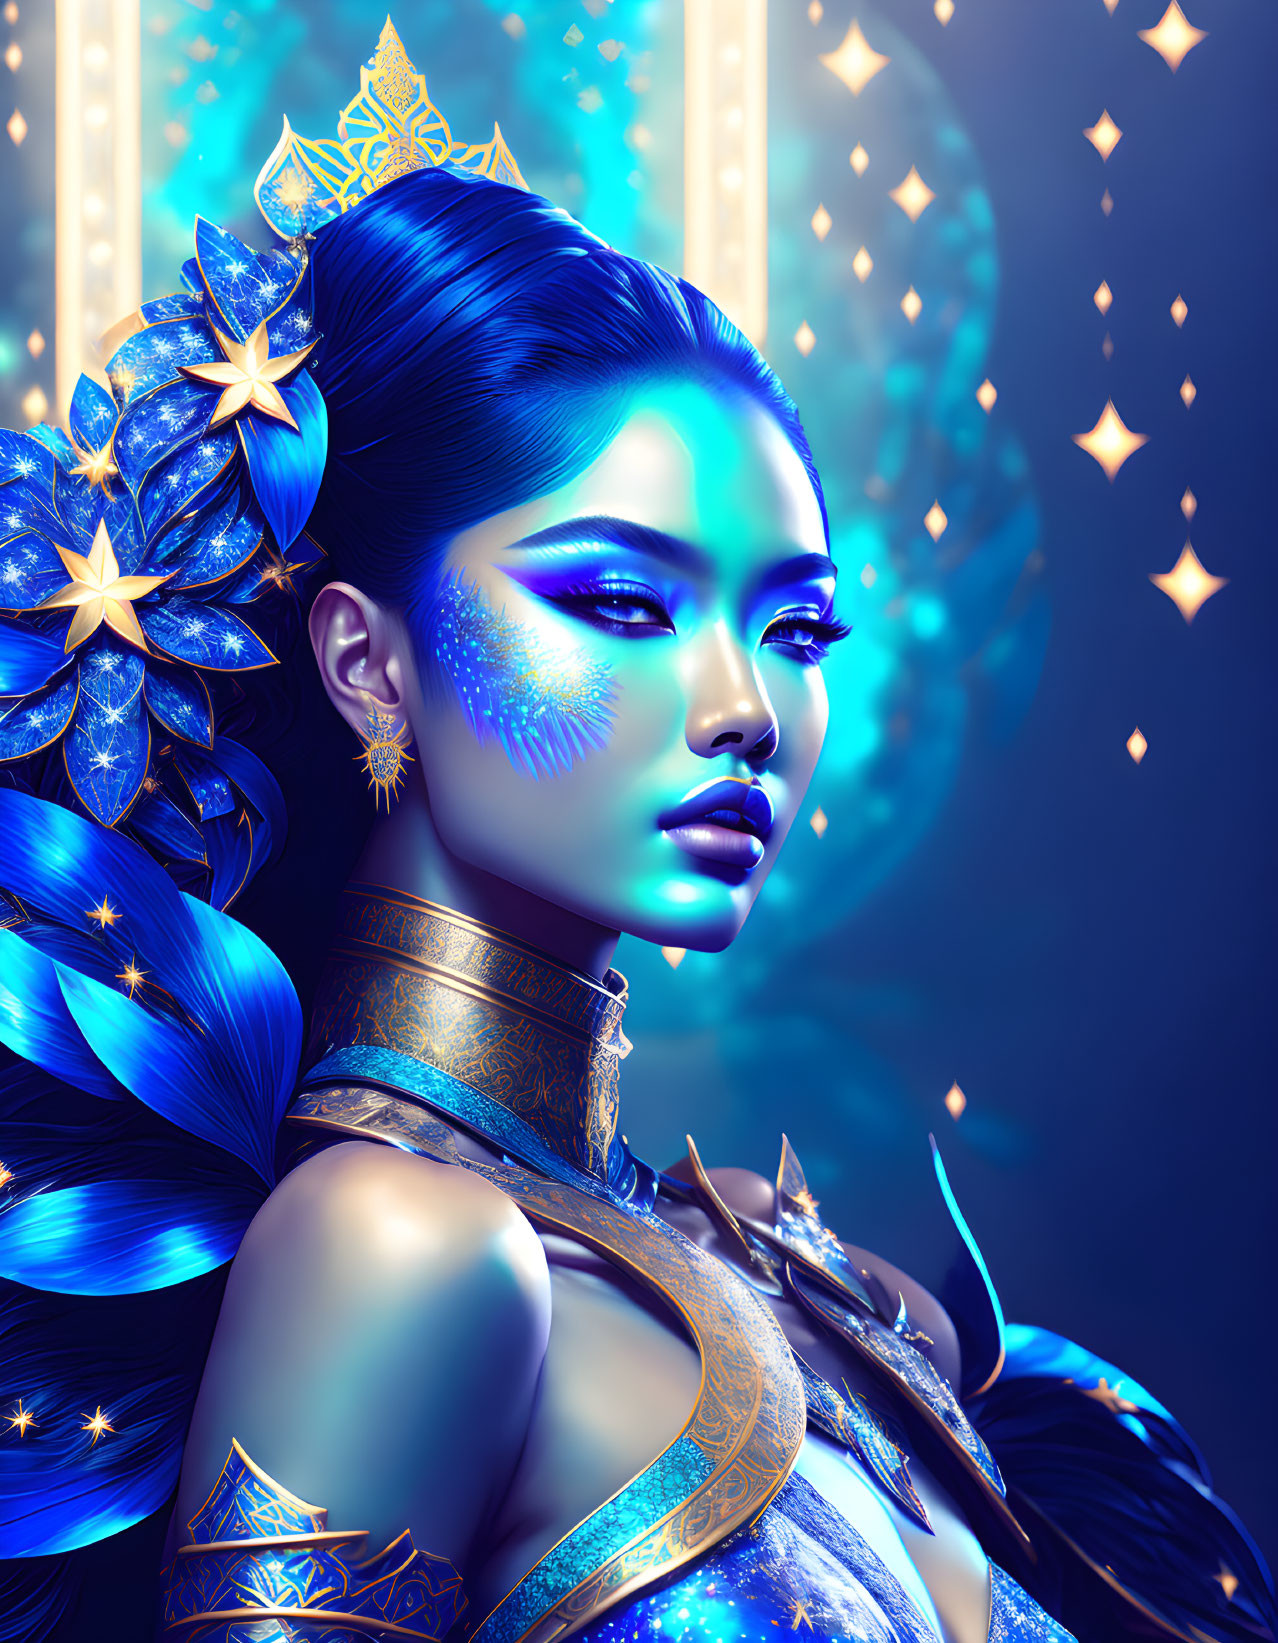 Stylized digital artwork of a woman with blue skin and intricate gold and blue headpiece.